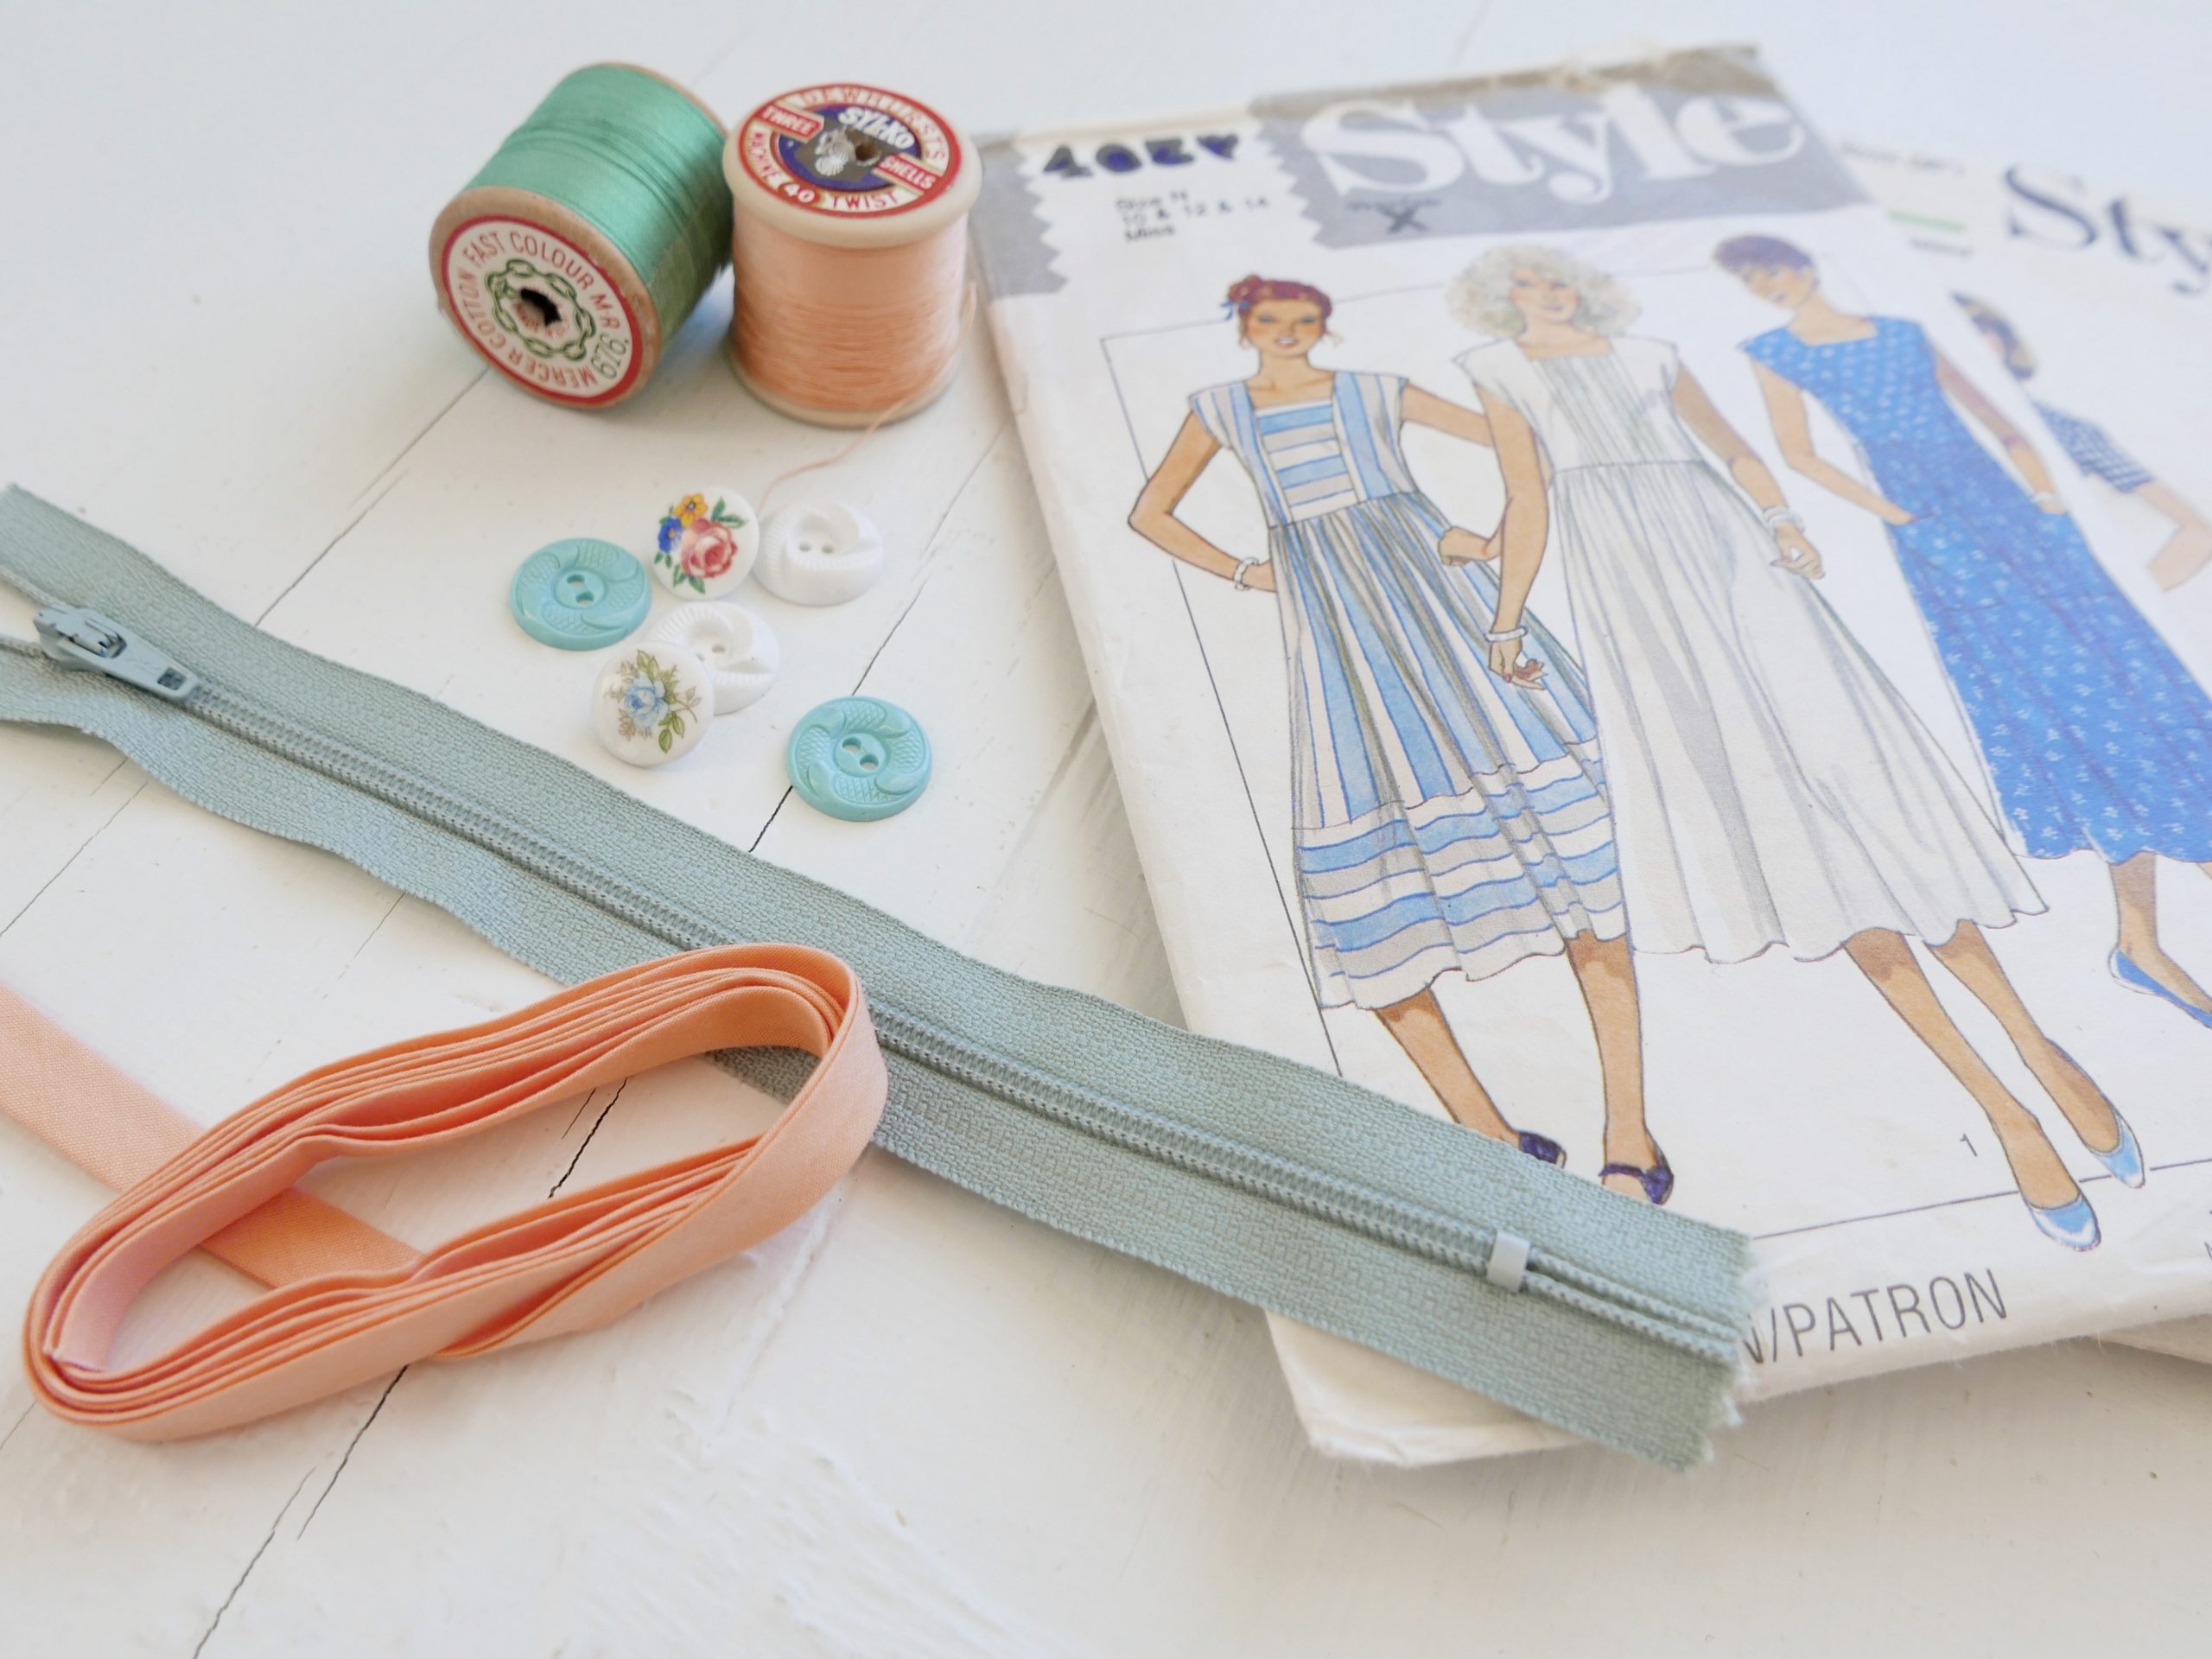 Sewing pattern and notions